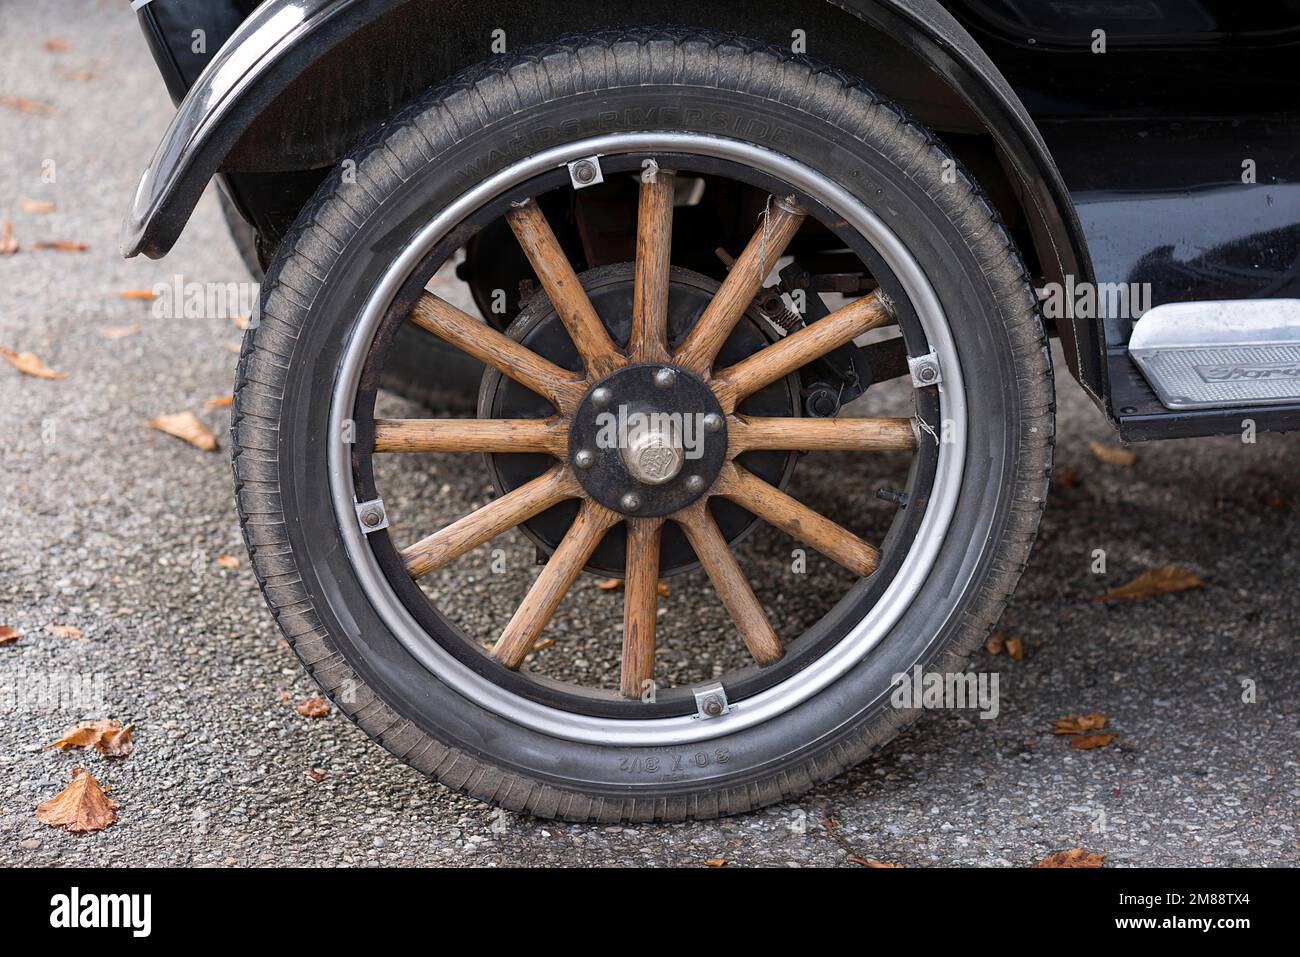 Wooden spoke wheel from a 1936 vintage Ford, Bavaria, Germany Stock Photo